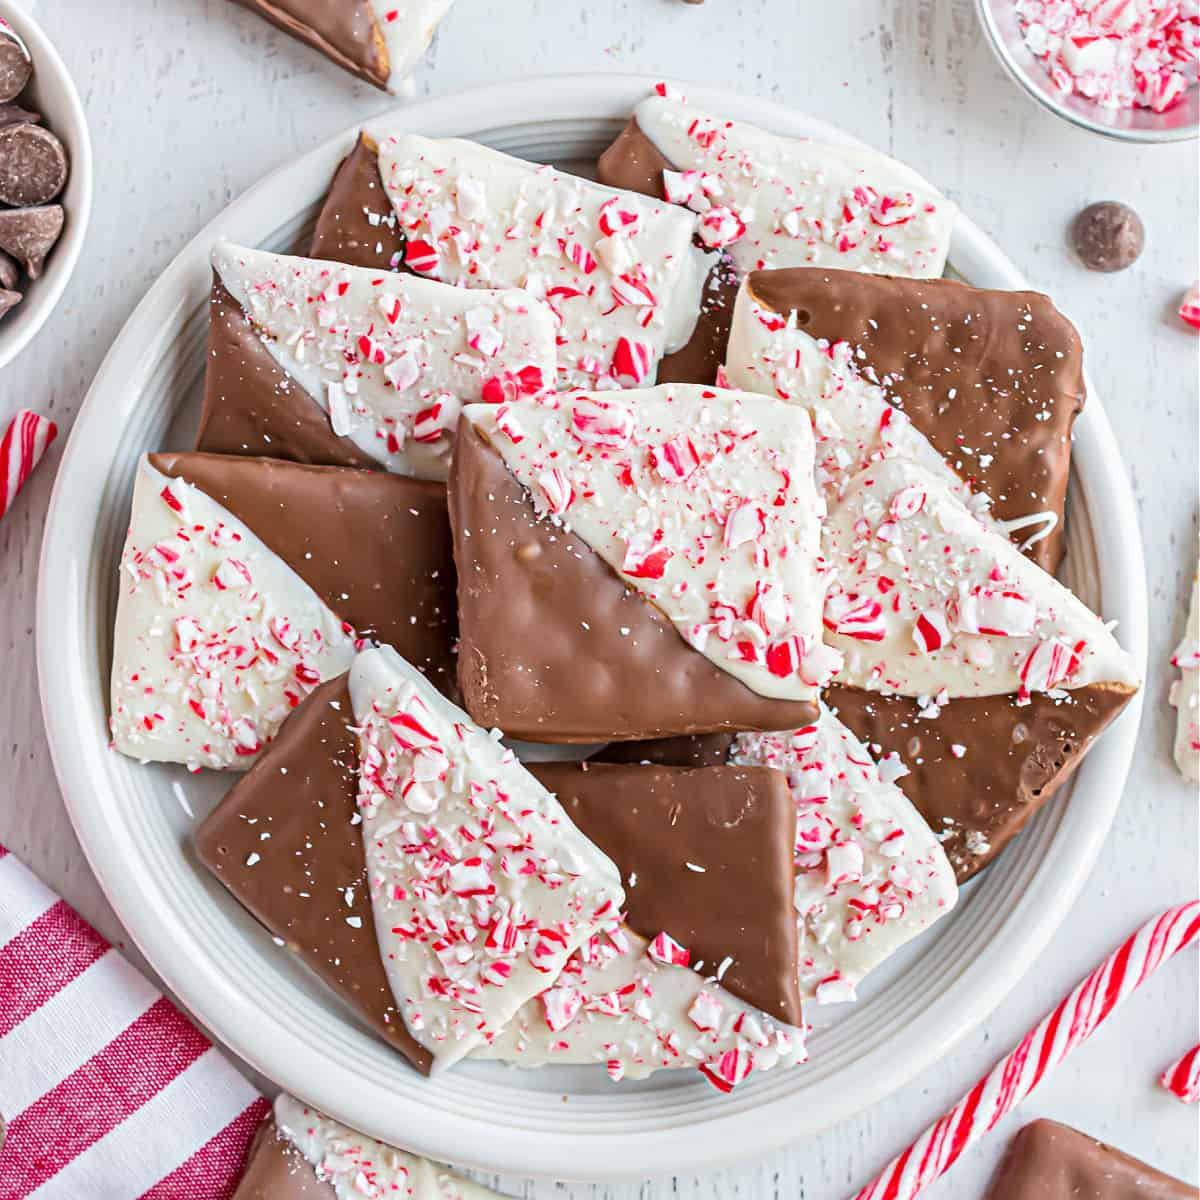 Chocolate Peppermint Grahams are the perfect last minute holiday treat. Peppermint Bark gets a chocolate graham cracker boost! These holiday treats covered in chocolate and peppermint are easy enough for the kids to make.